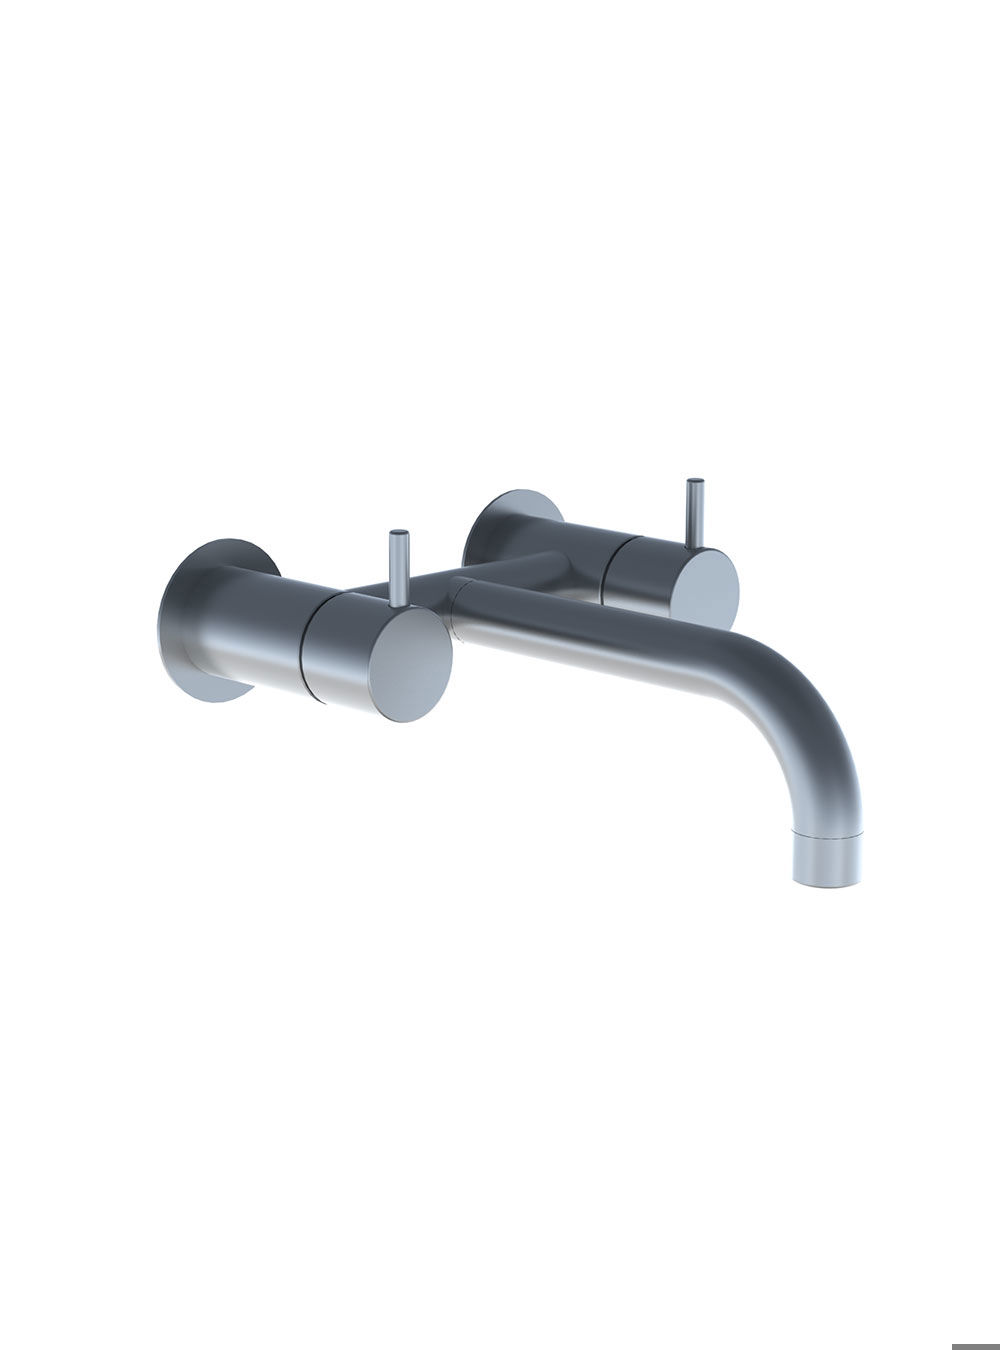 1621: Two-handle mixer with ¼ turn ceramic disc technology for surface mounting on solid wall. Projection 